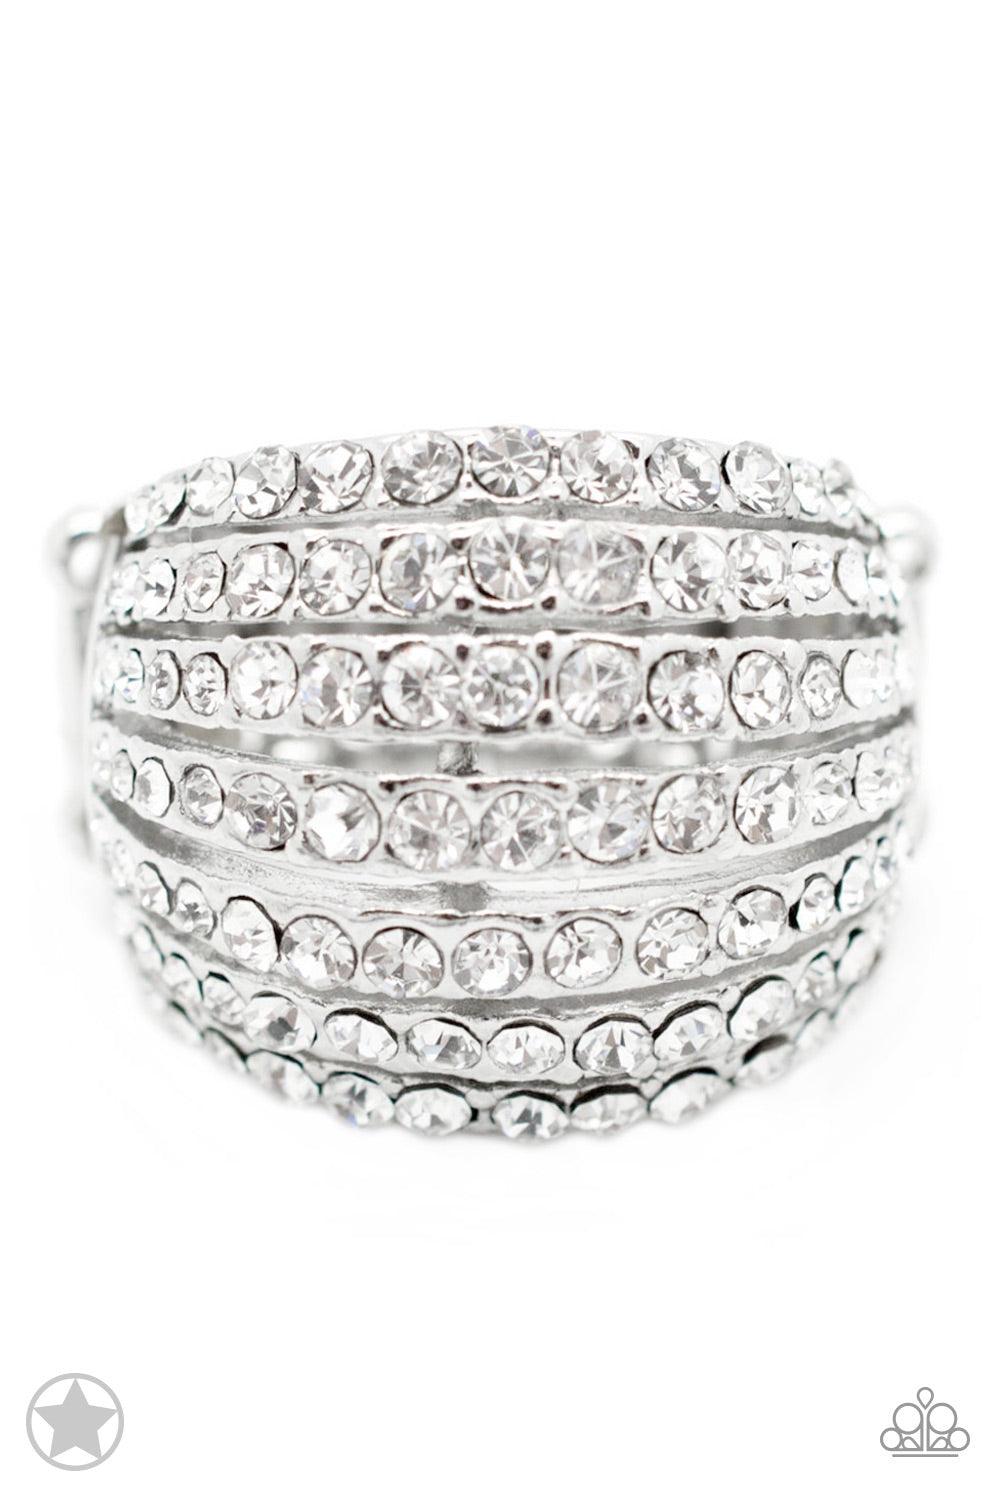 Paparazzi Accessories Blinding Brilliance - White Row after row of incandescent white rhinestones stack into a dazzling display. The gorgeous rounded bands and undeniable sparkle create a regal statement piece. Features a stretchy band for a flexible fit.